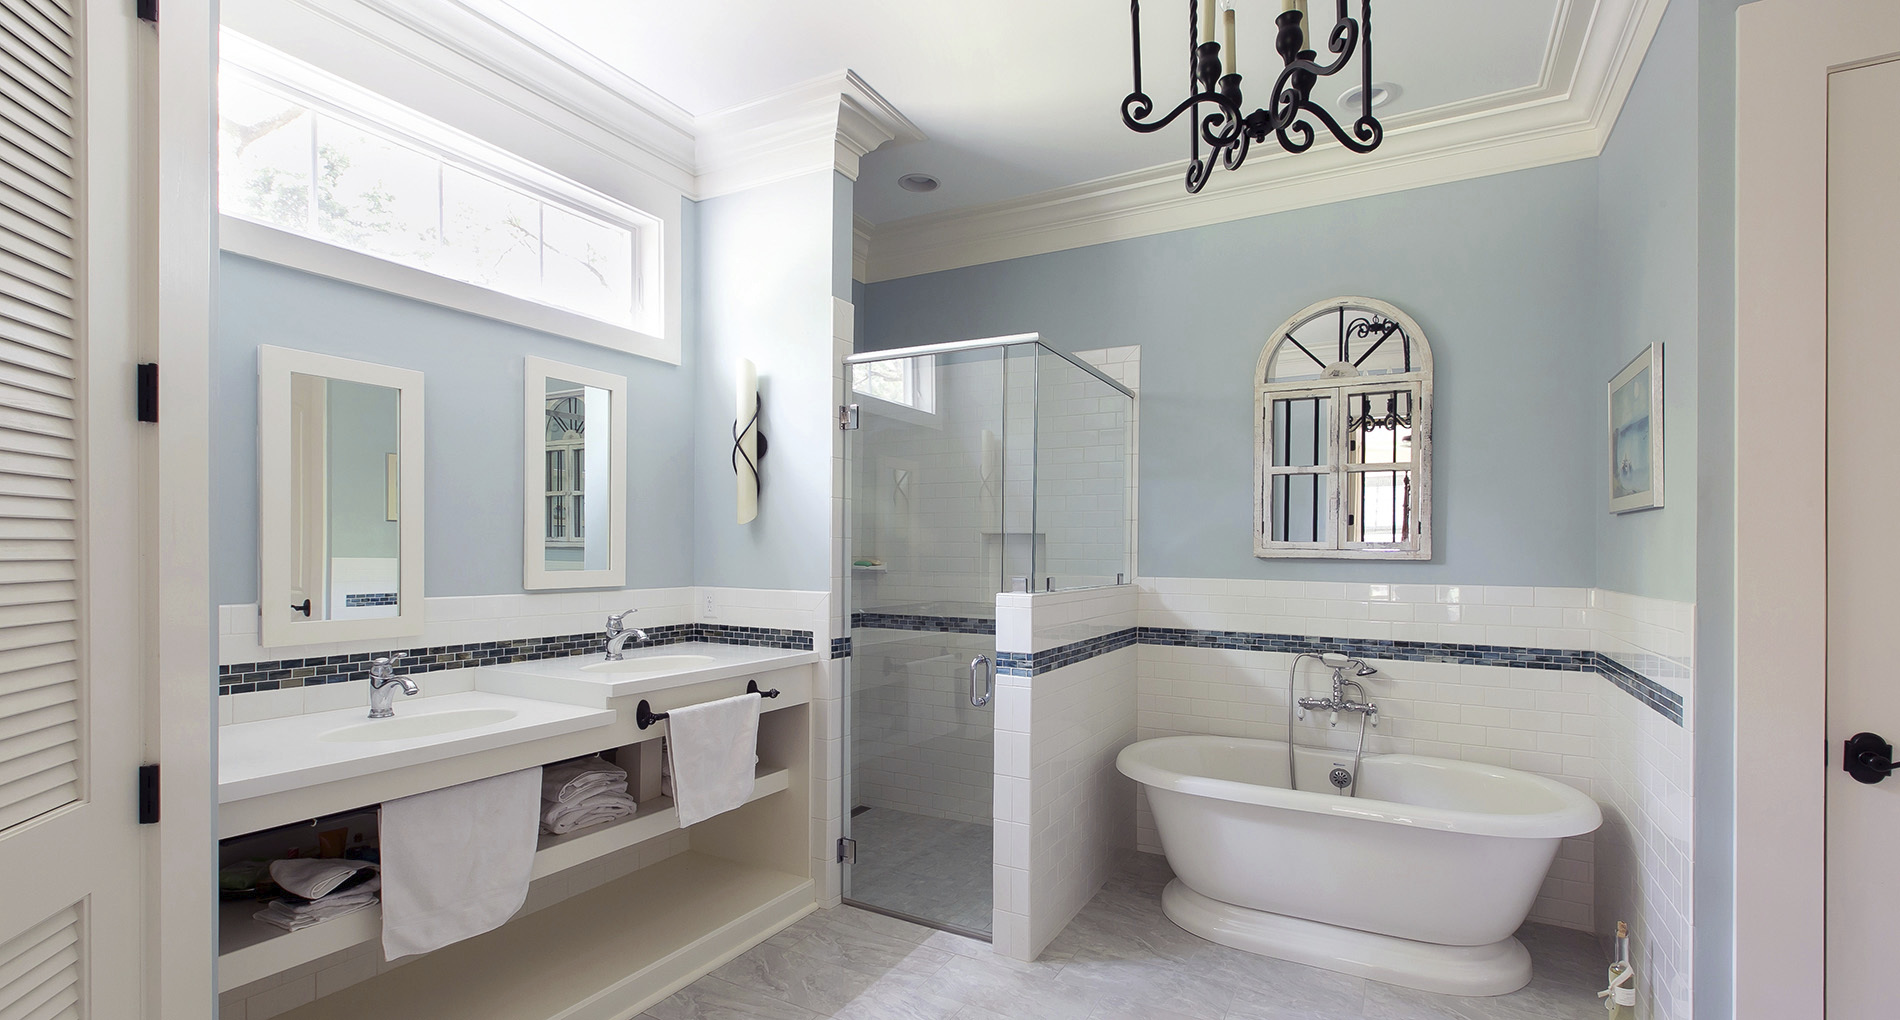 Light blue bathroom with destination tub and custom heights for each sink with cabinet space below for towels. 